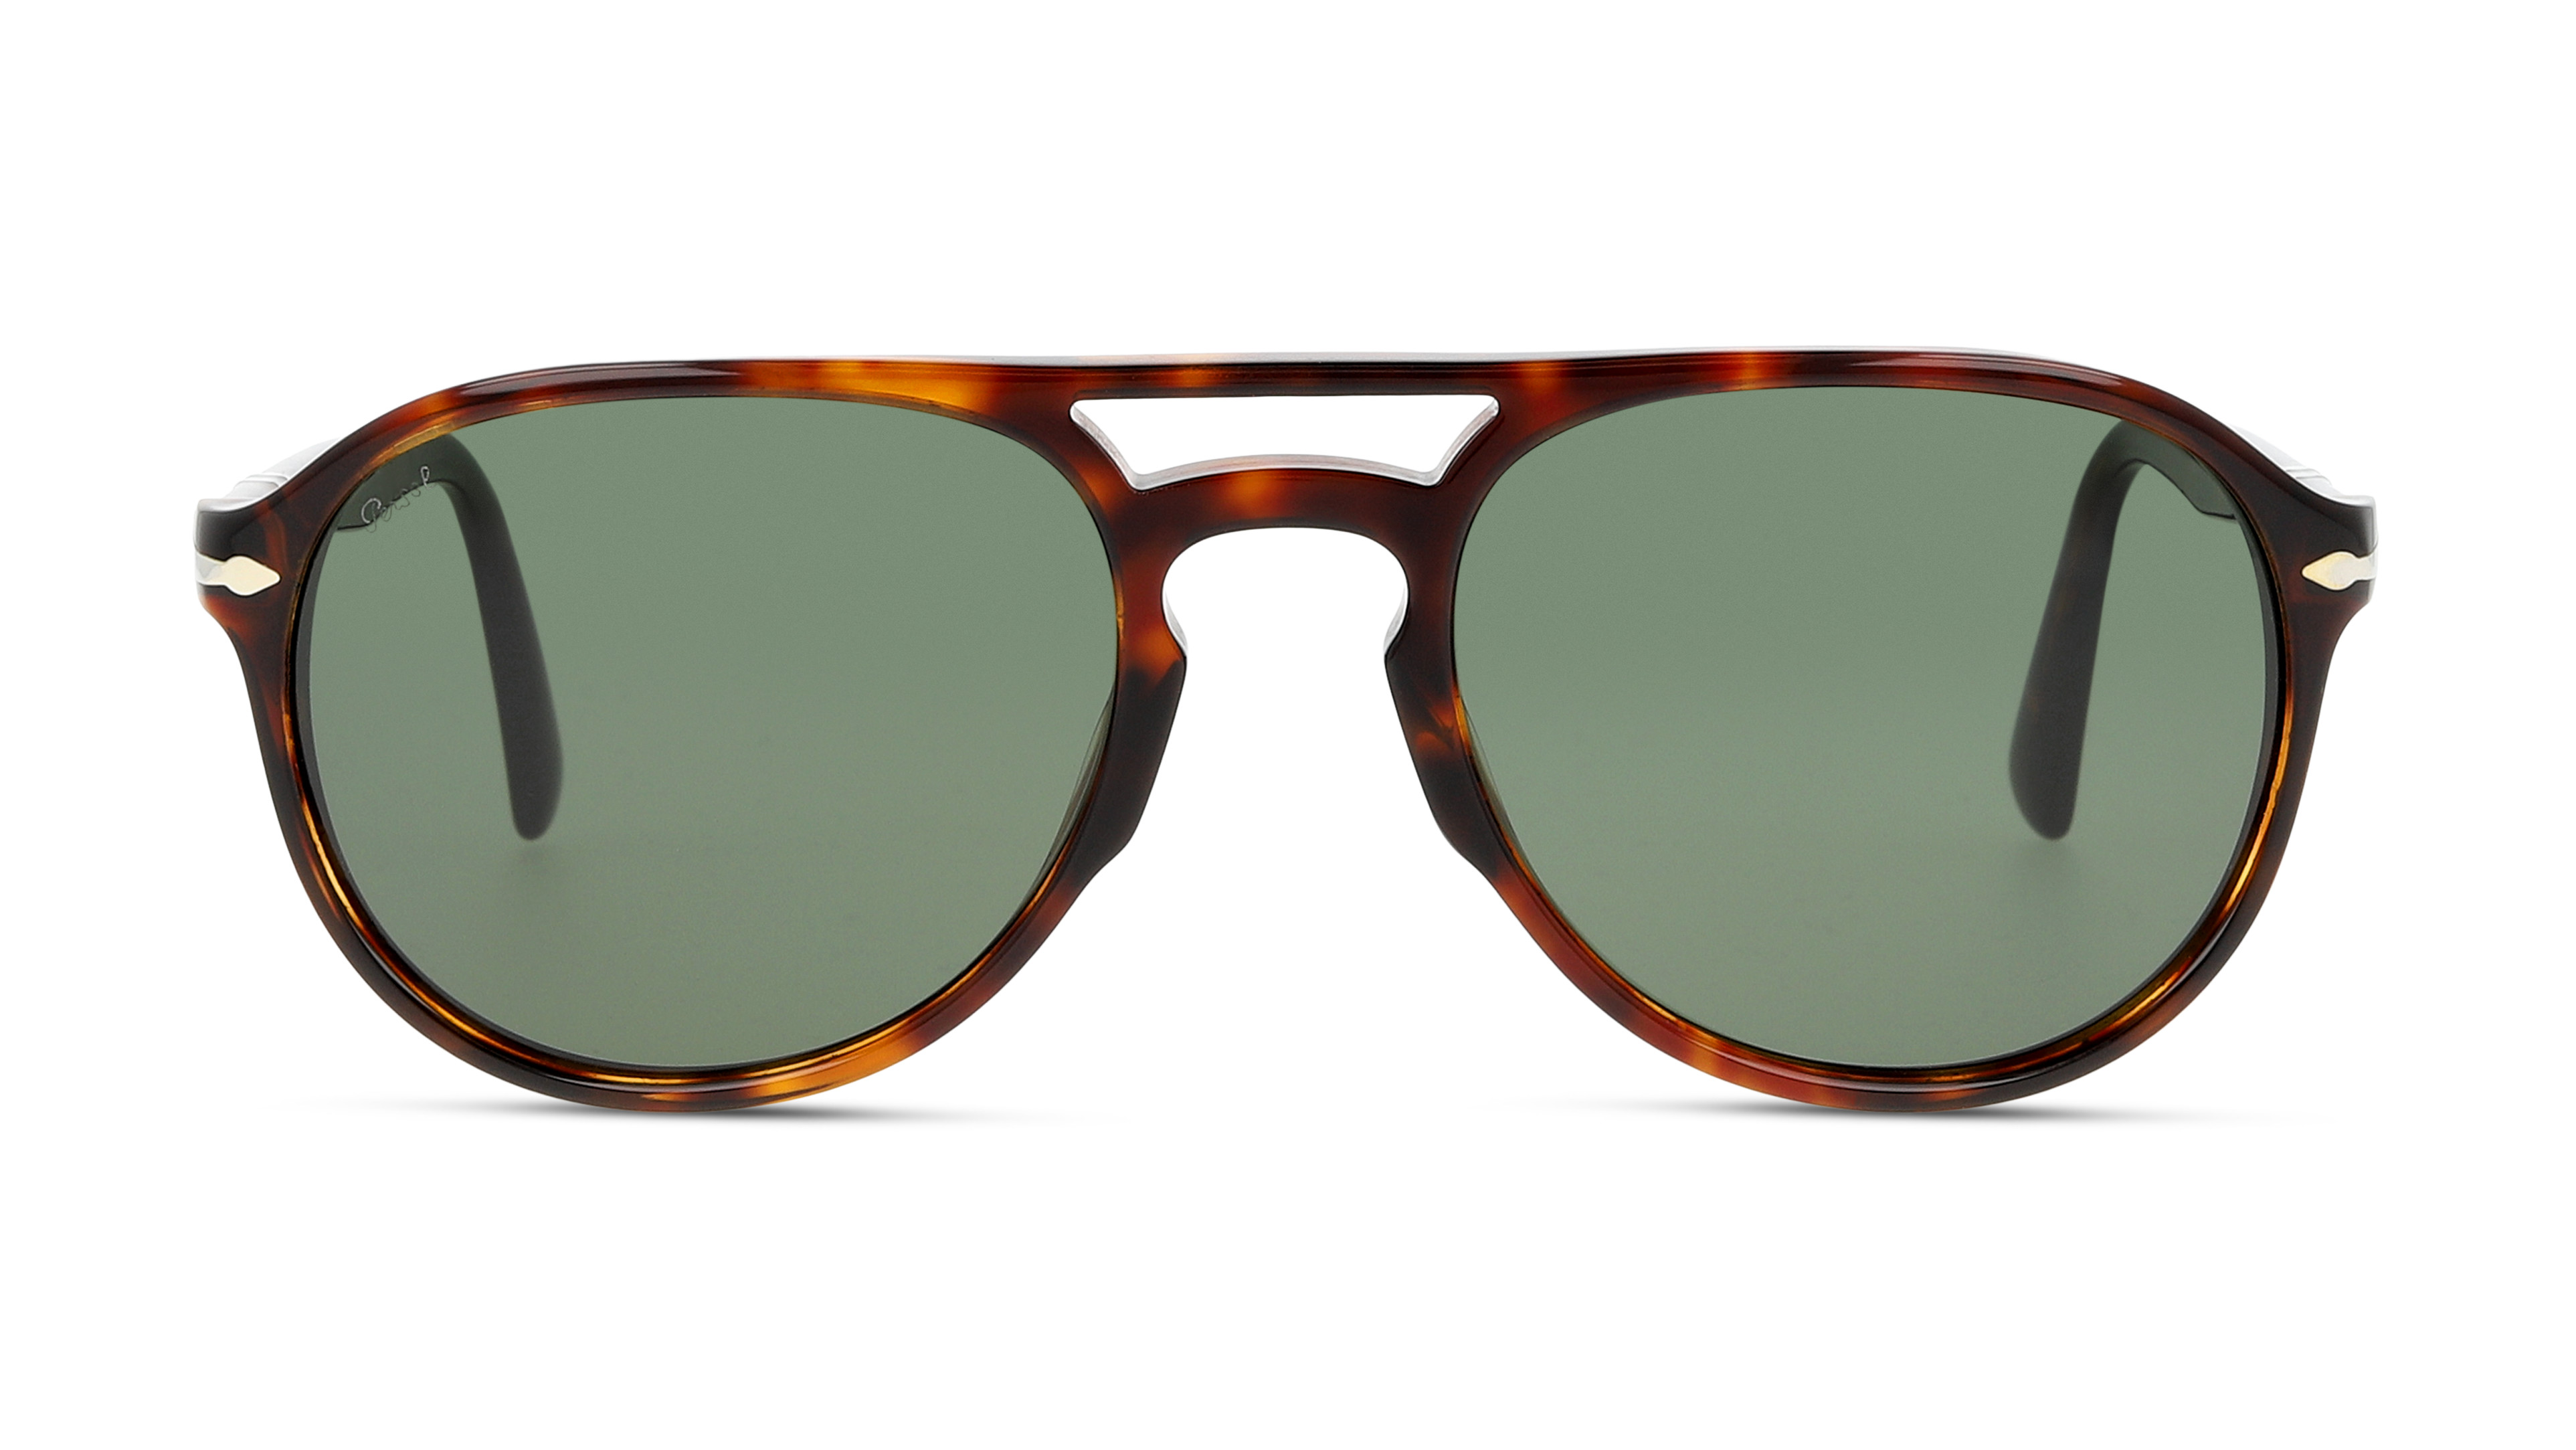 [products.image.front] Persol 0PO3235S 24/31 Sonnenbrille